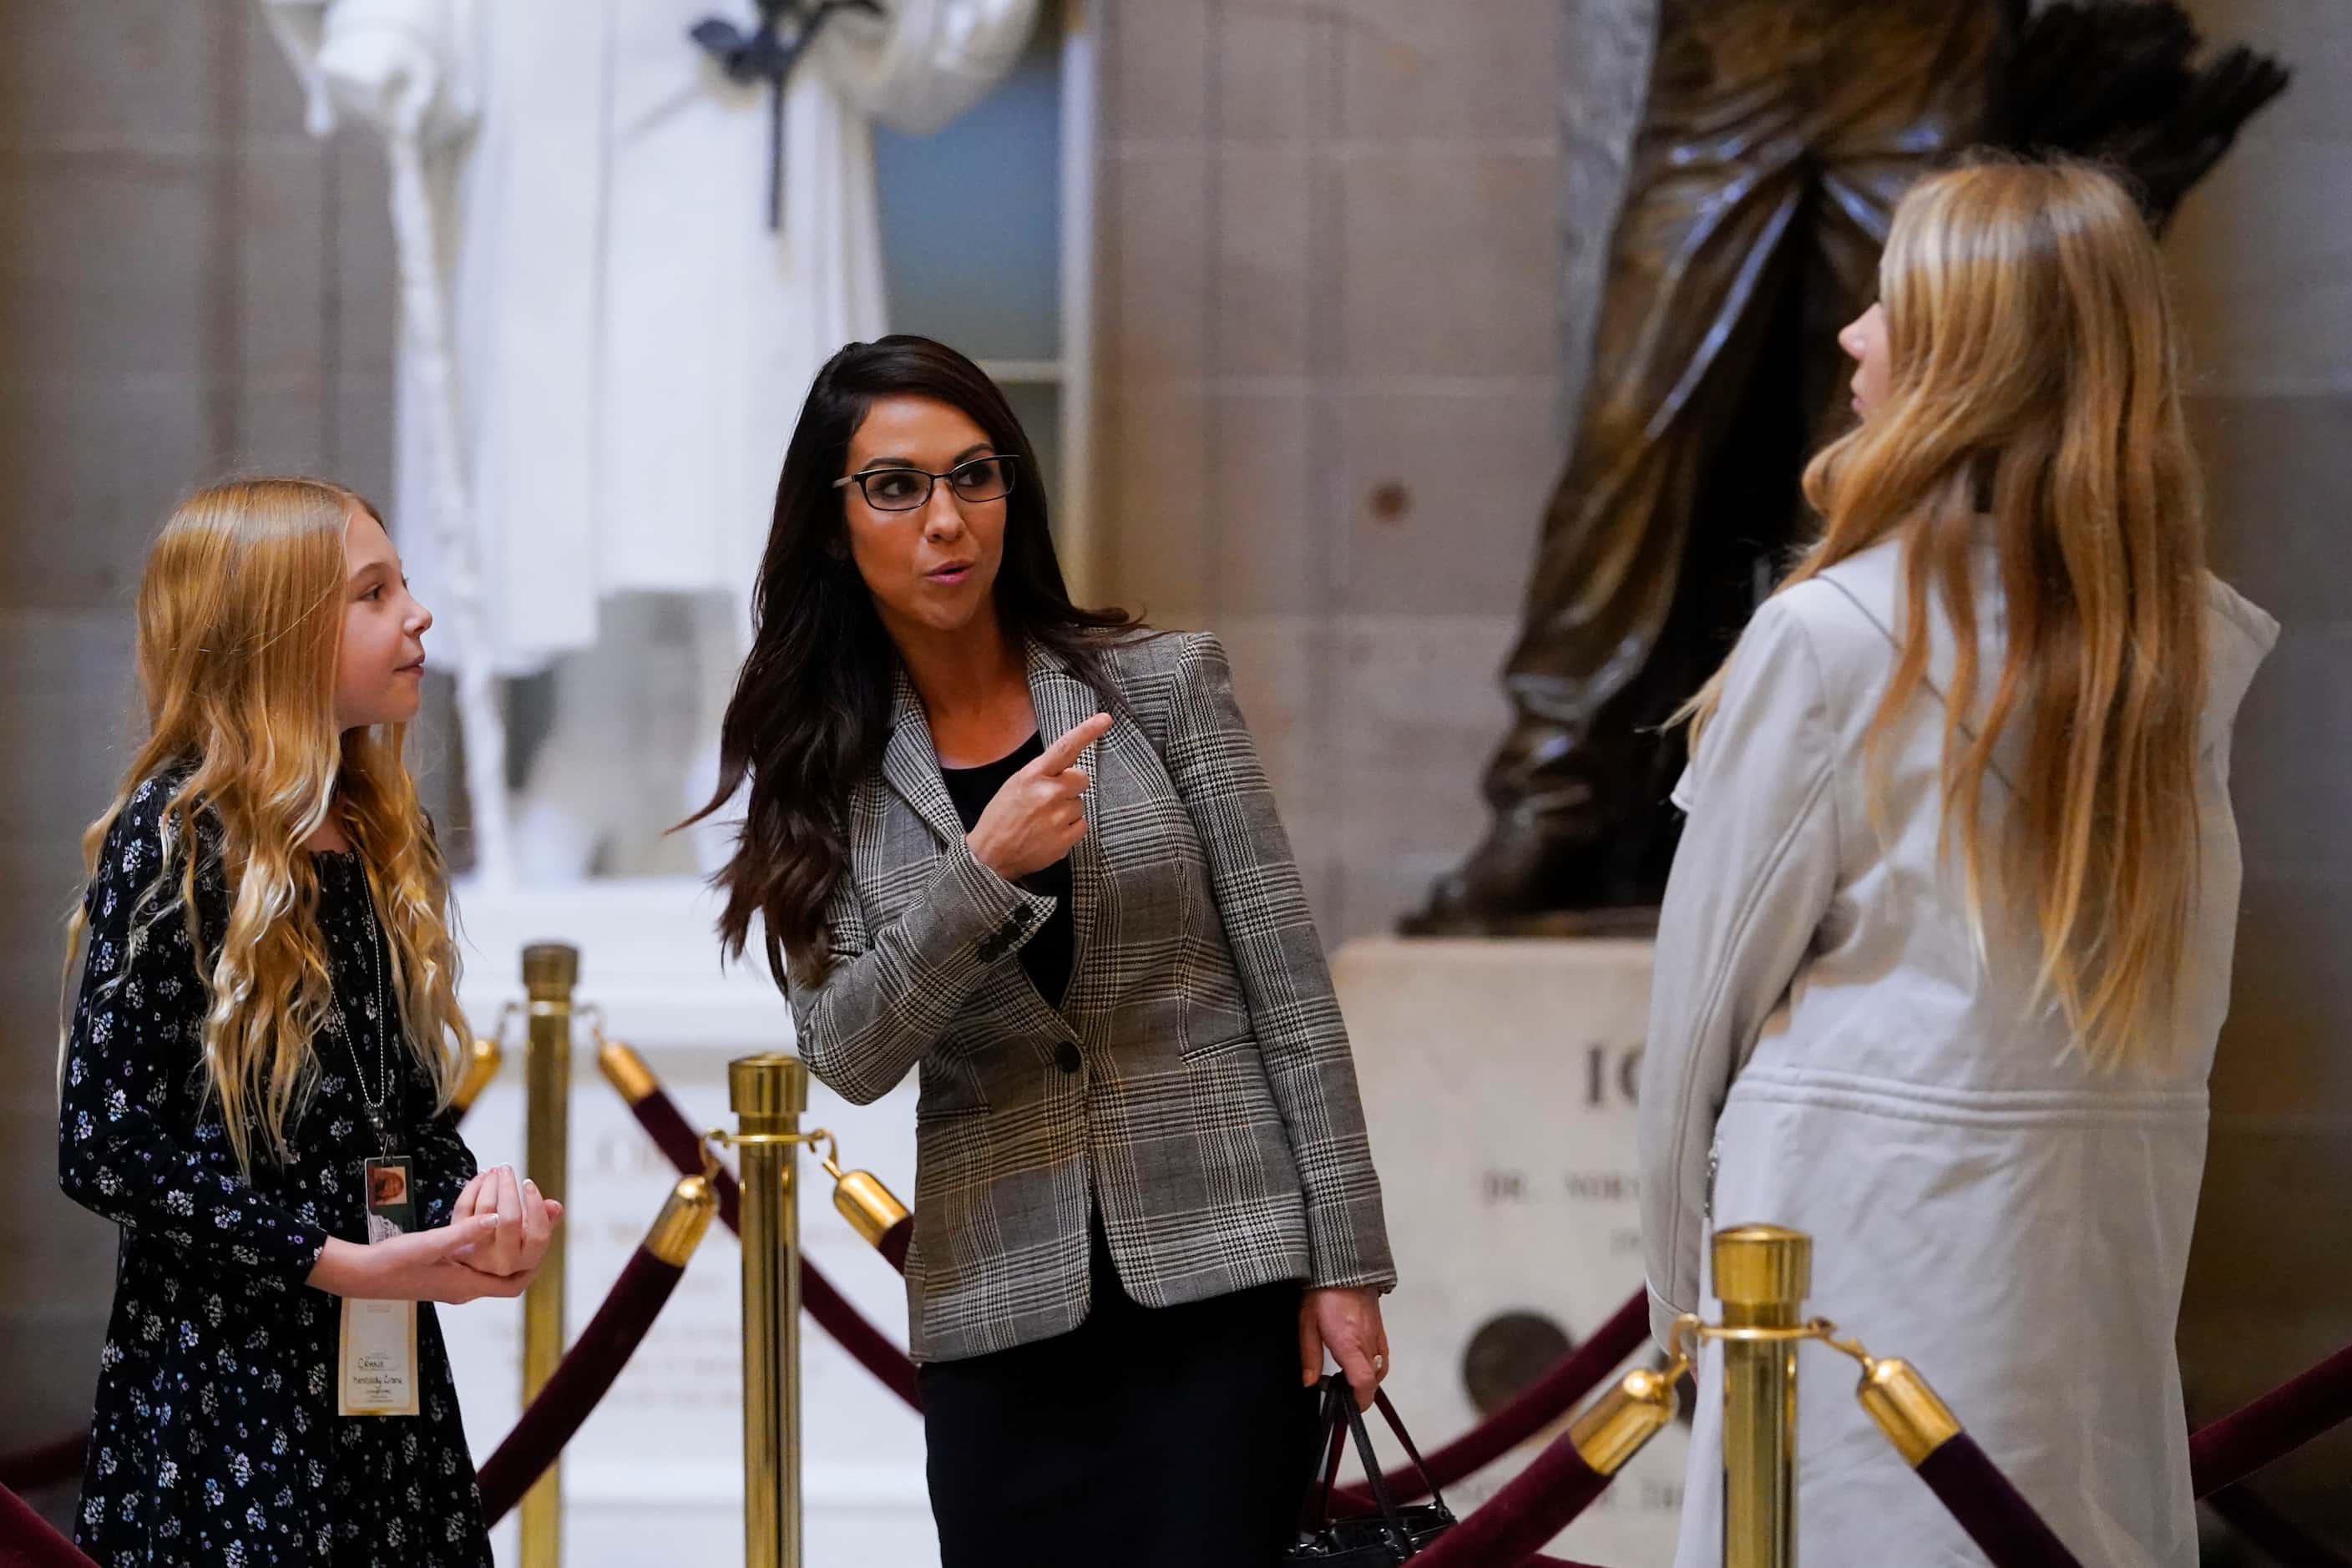 Rep. Lauren Boebert, R-Colo., center, gives a tour of Statuary Hall as the House meets for...